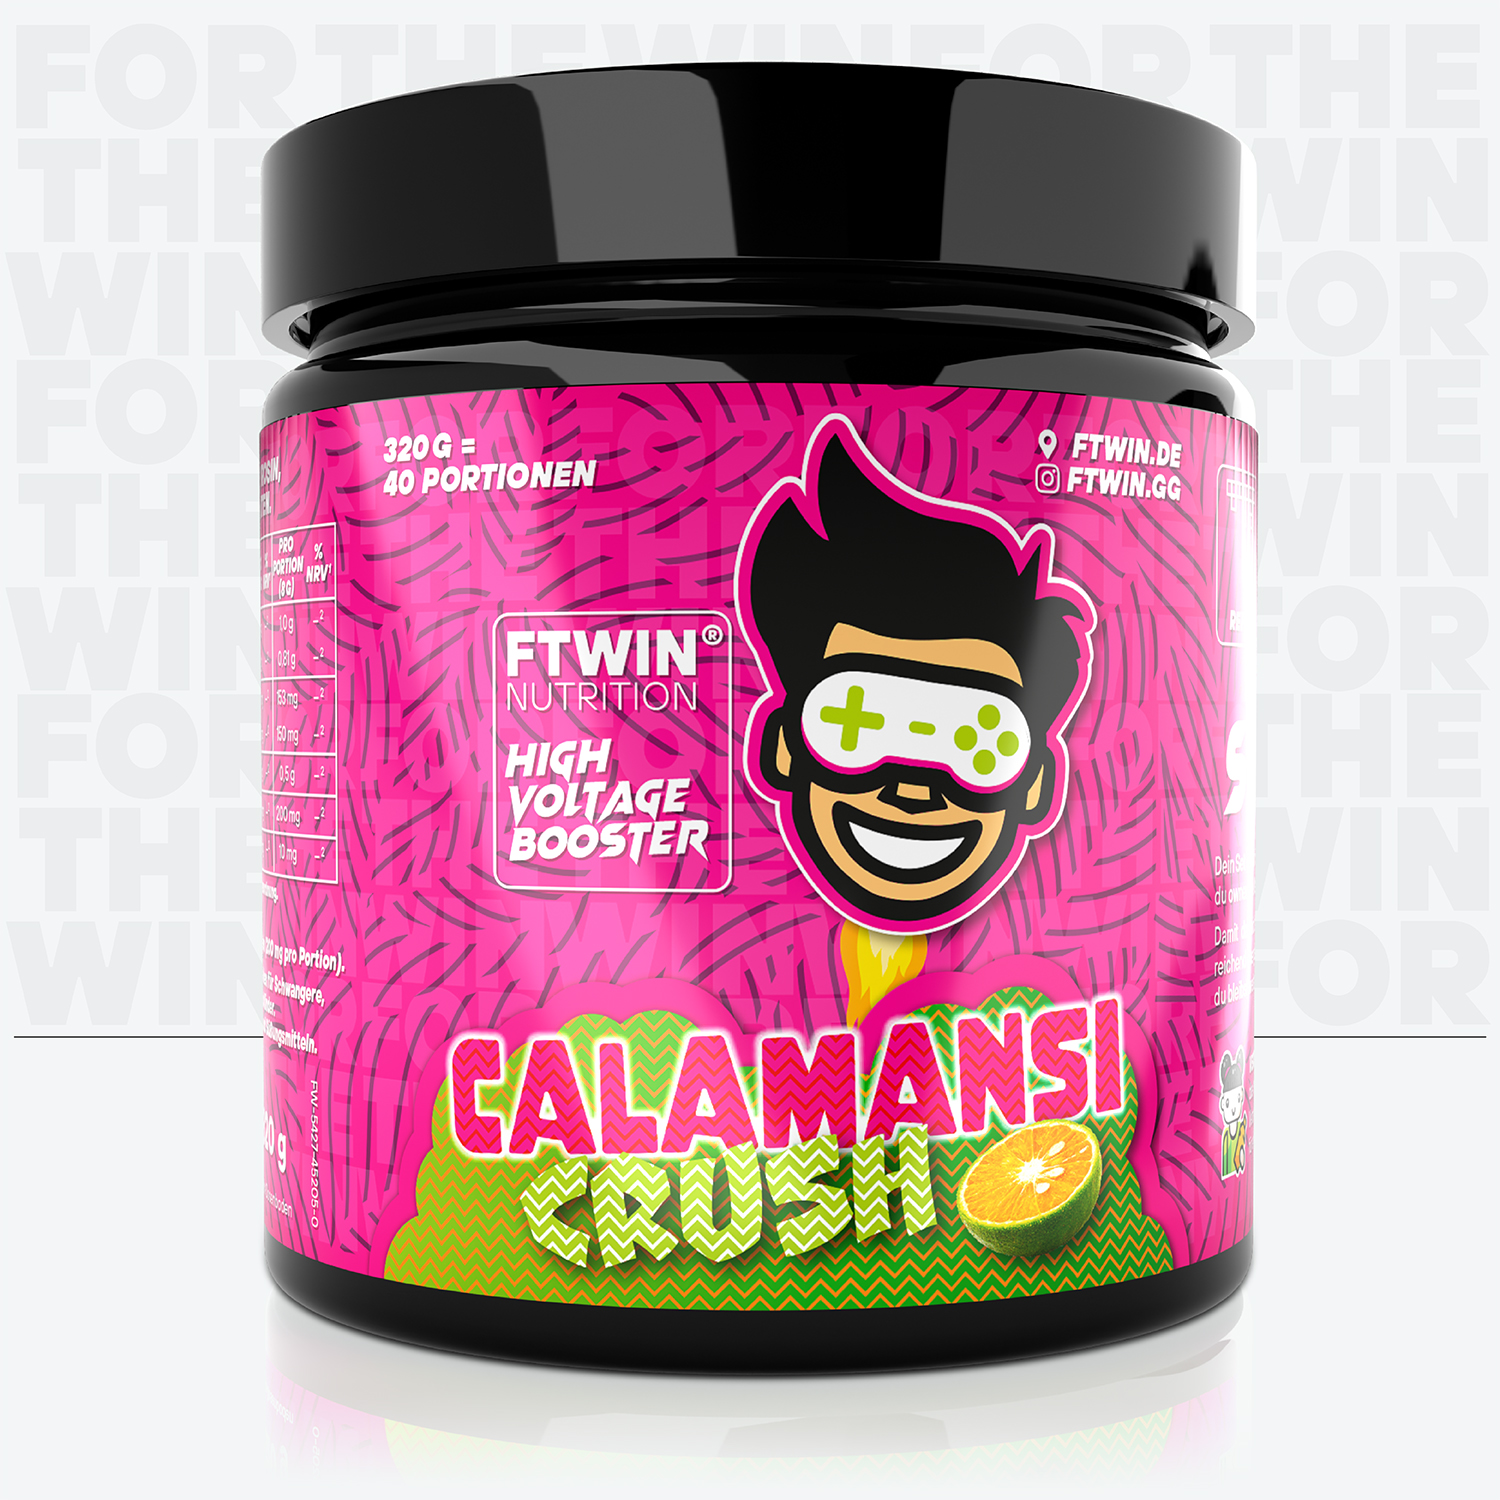 FTWIN High Voltage Gaming Booster – Calamansi Crush Flavour